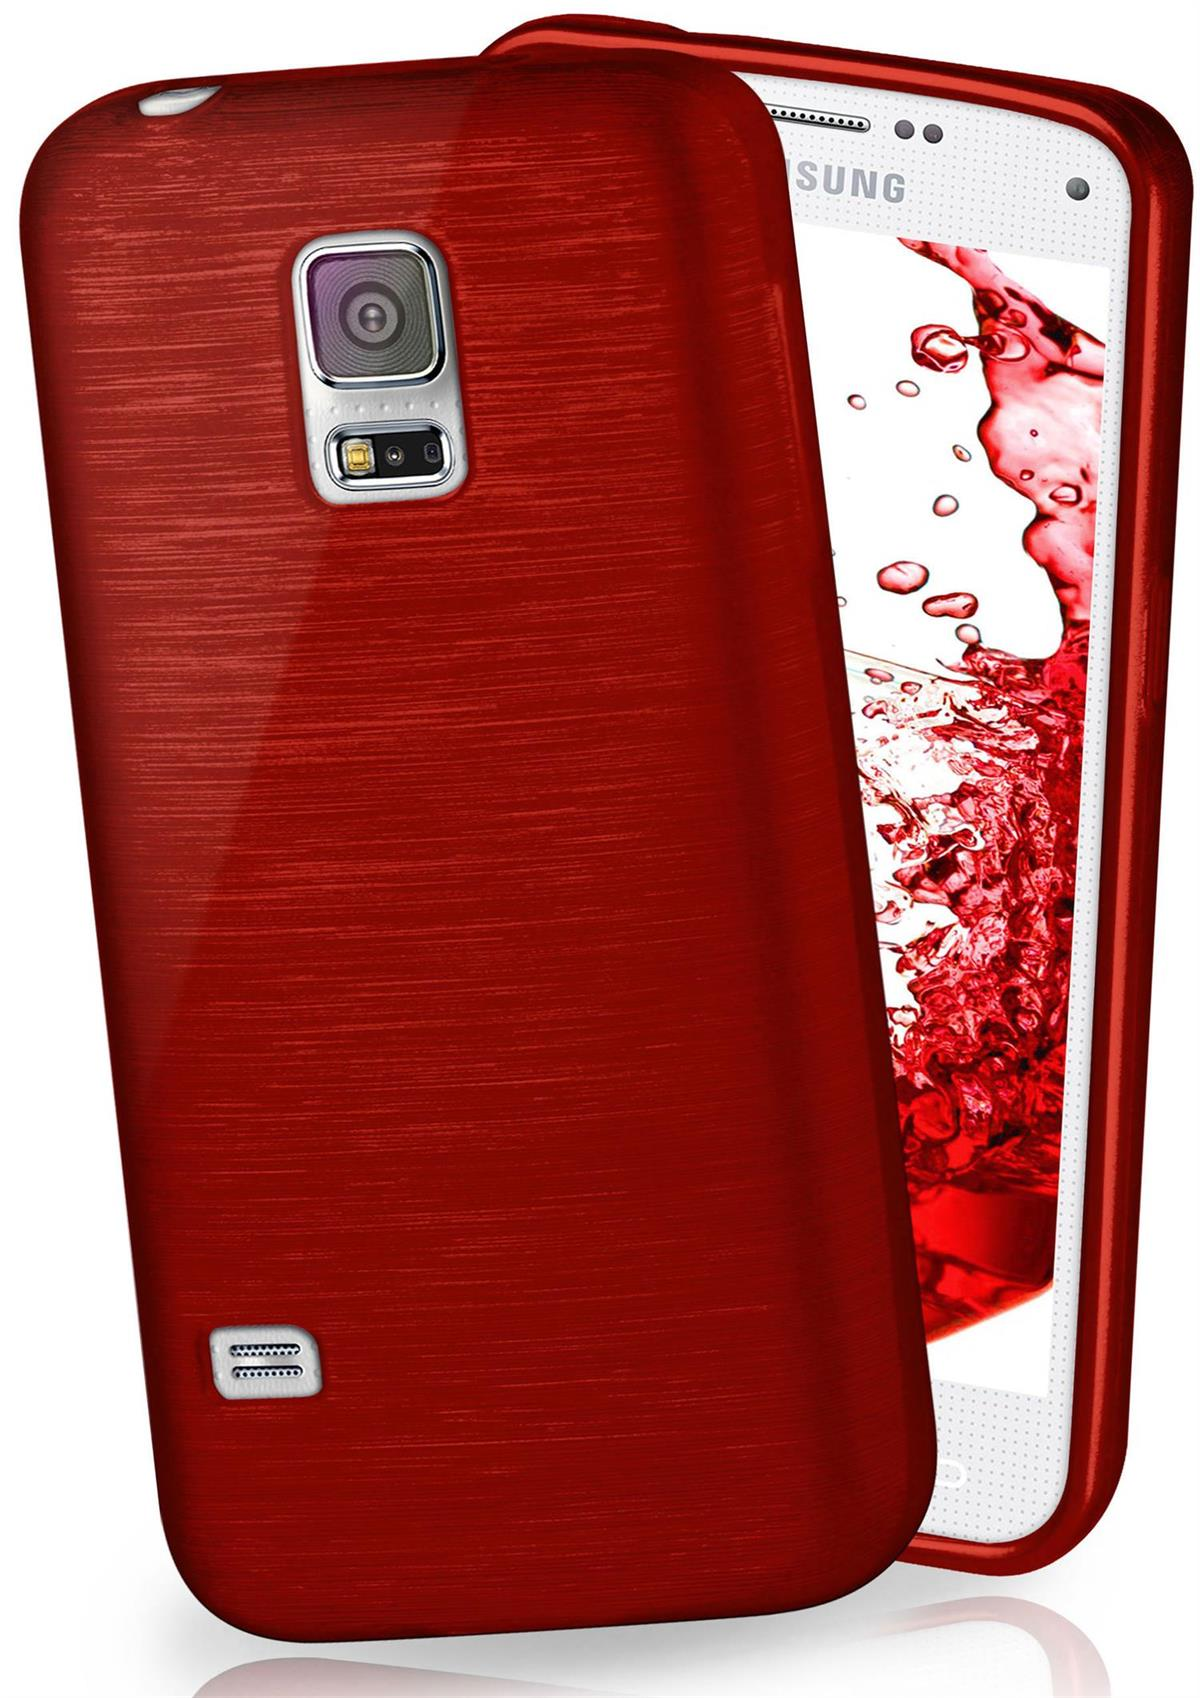 MOEX Brushed Case, Crimson-Red Samsung, Neo, S5 Galaxy Backcover